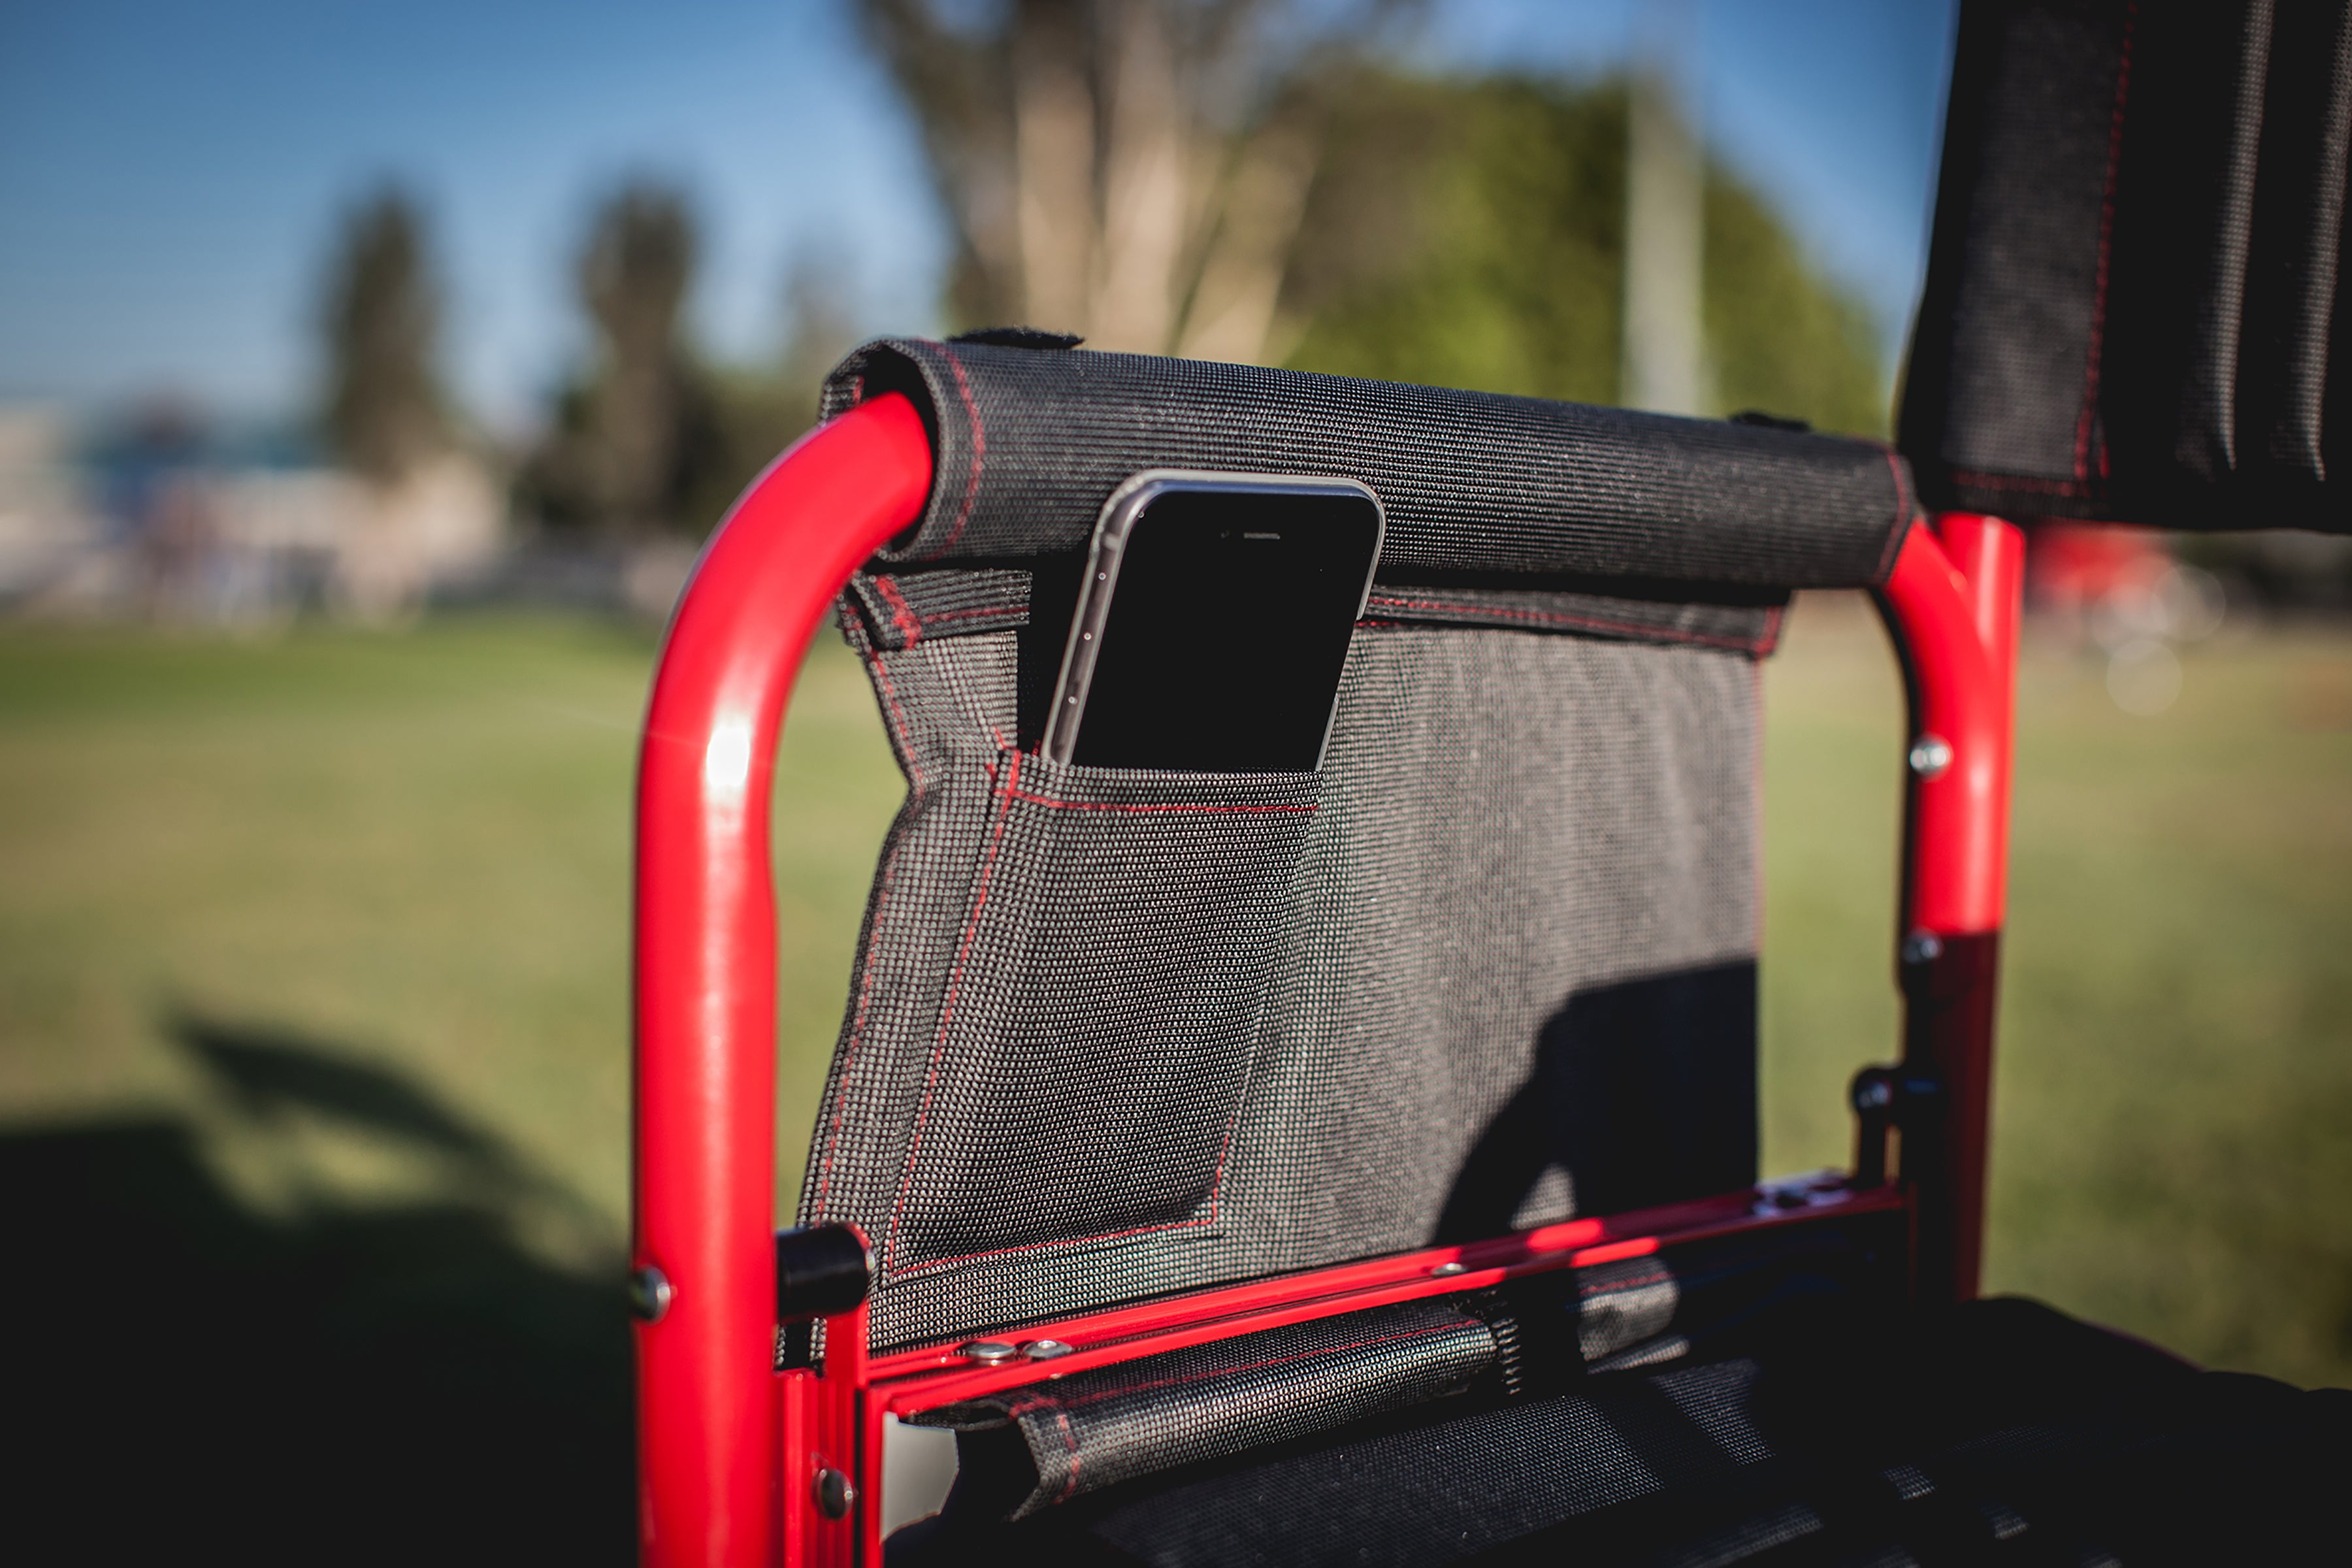 Los Angeles Angels - Fusion Camping Chair